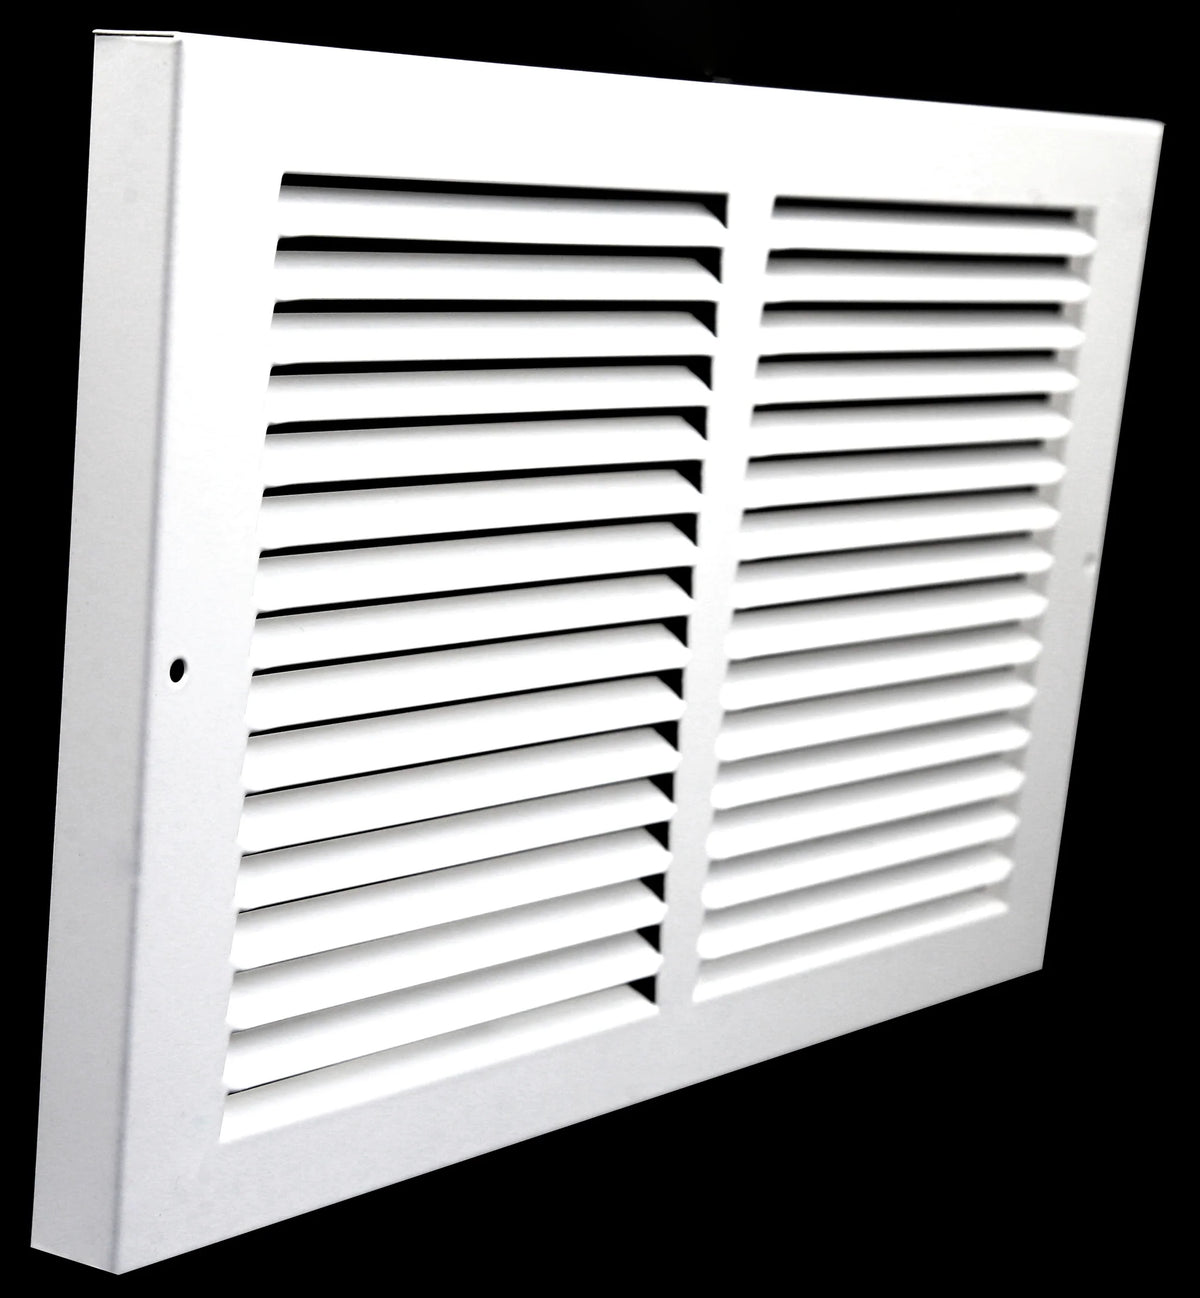 36&quot; X 8&quot; Air Vent Return Grilles - Sidewall and Ceiling - HVAC VENT DUCT COVER DIFFUSER - Steel